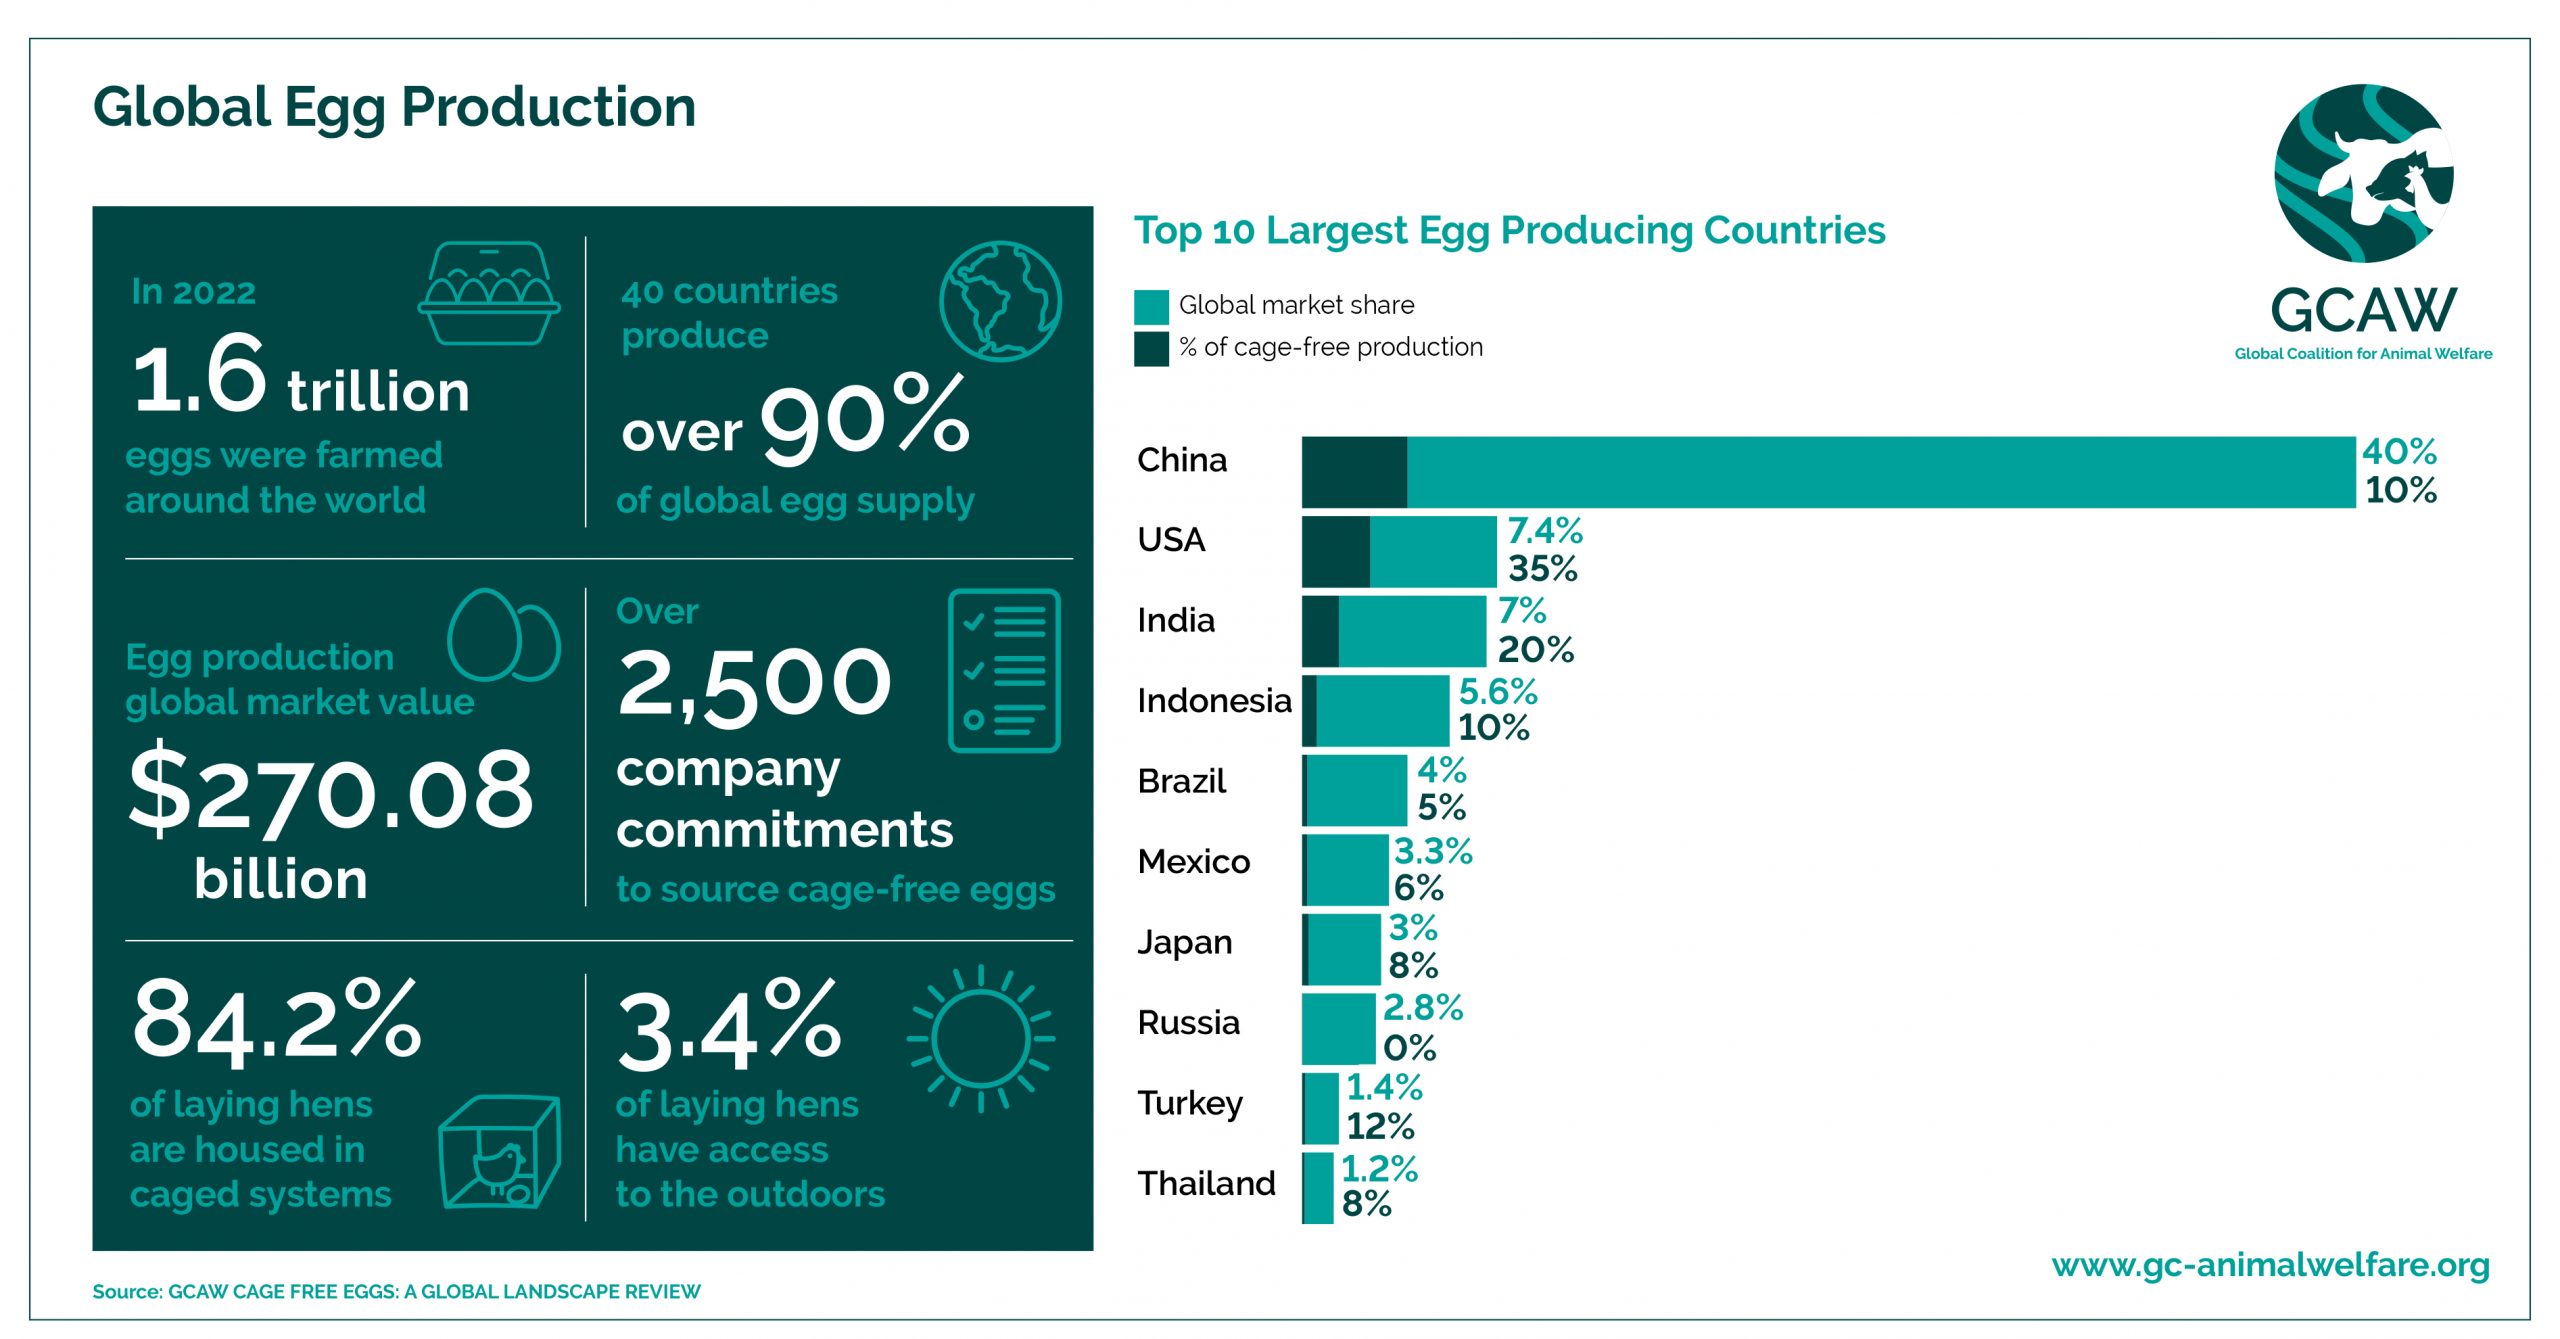 GCAW The 10 Largest Egg Producing Countries - Infographic